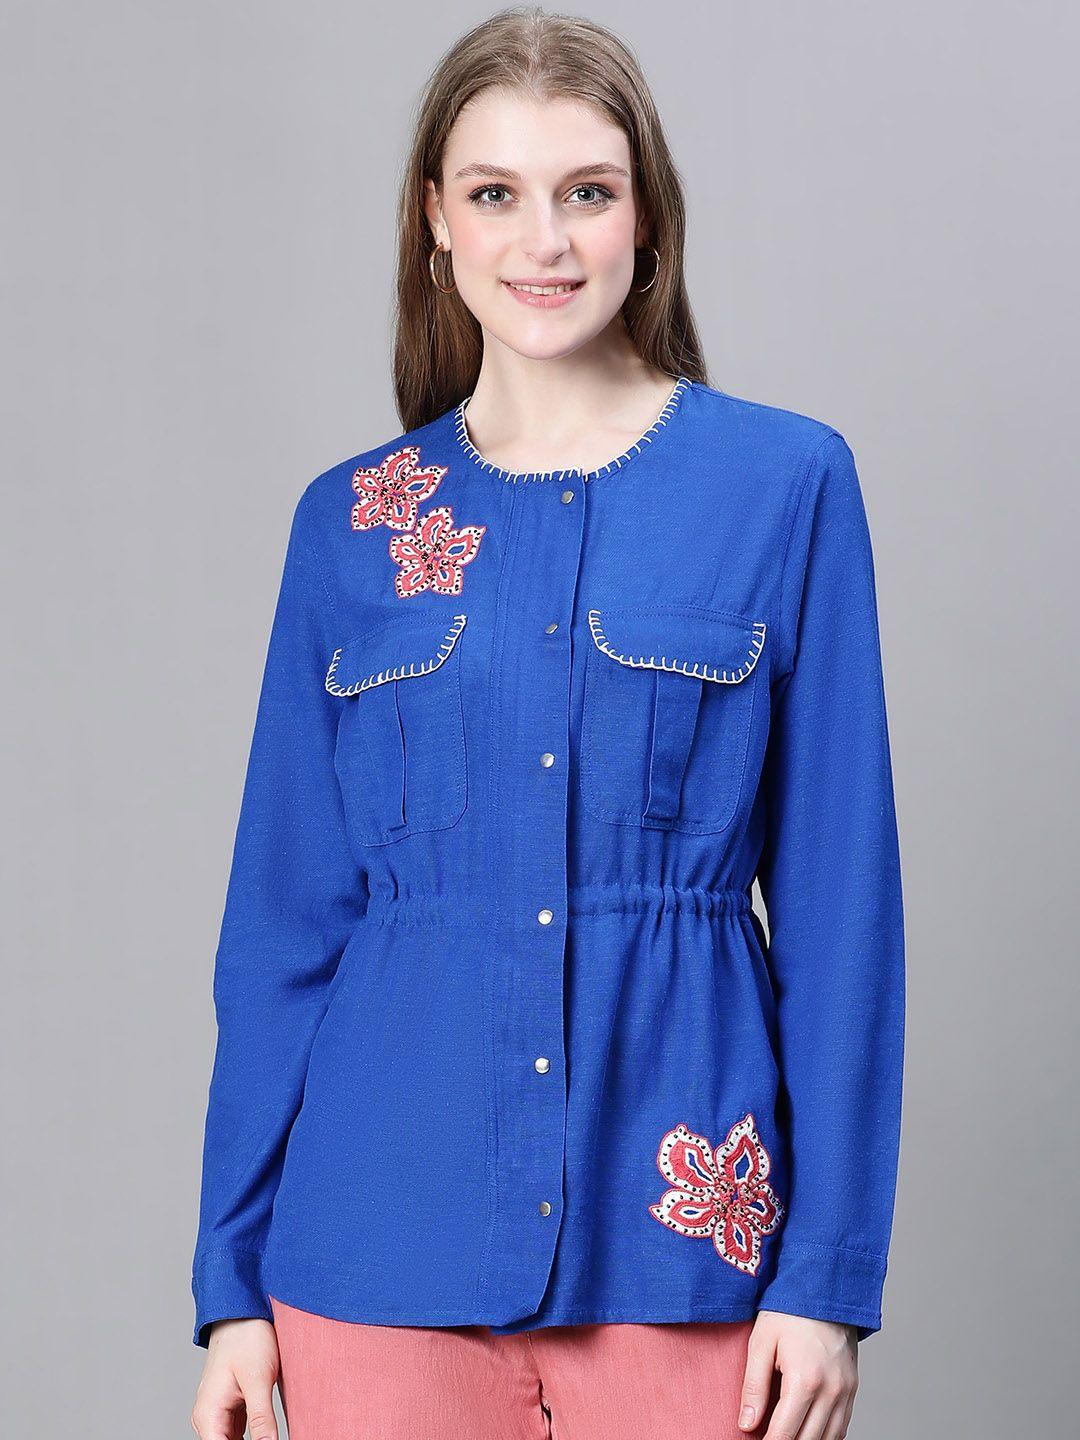 oxolloxo floral embroidered lightweight cotton tailored jacket